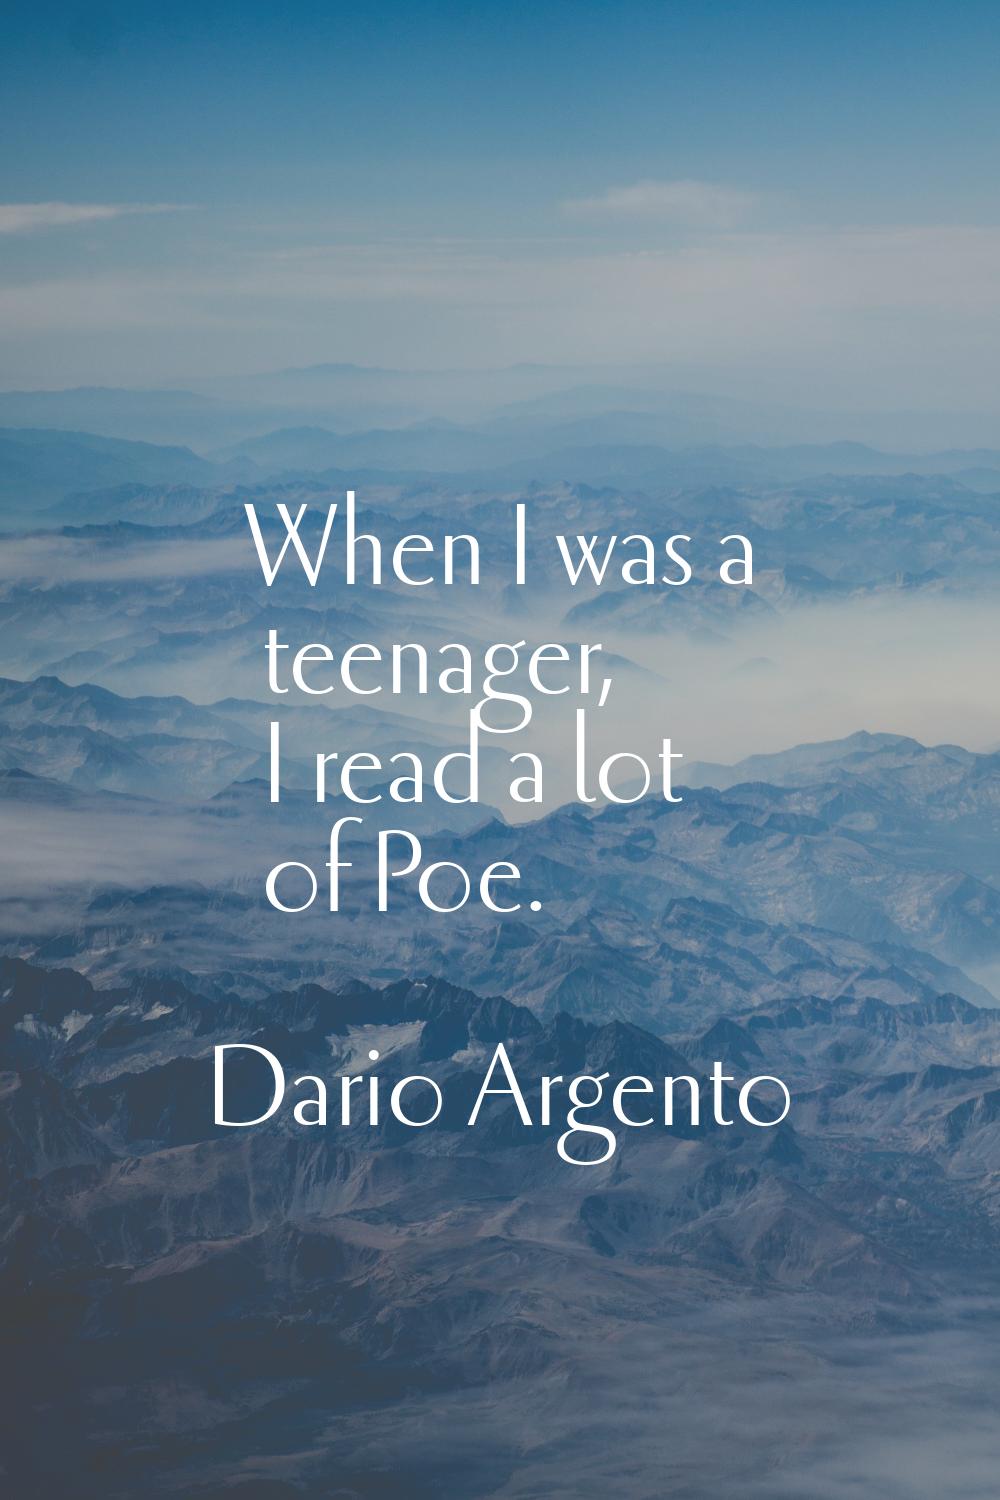 When I was a teenager, I read a lot of Poe.